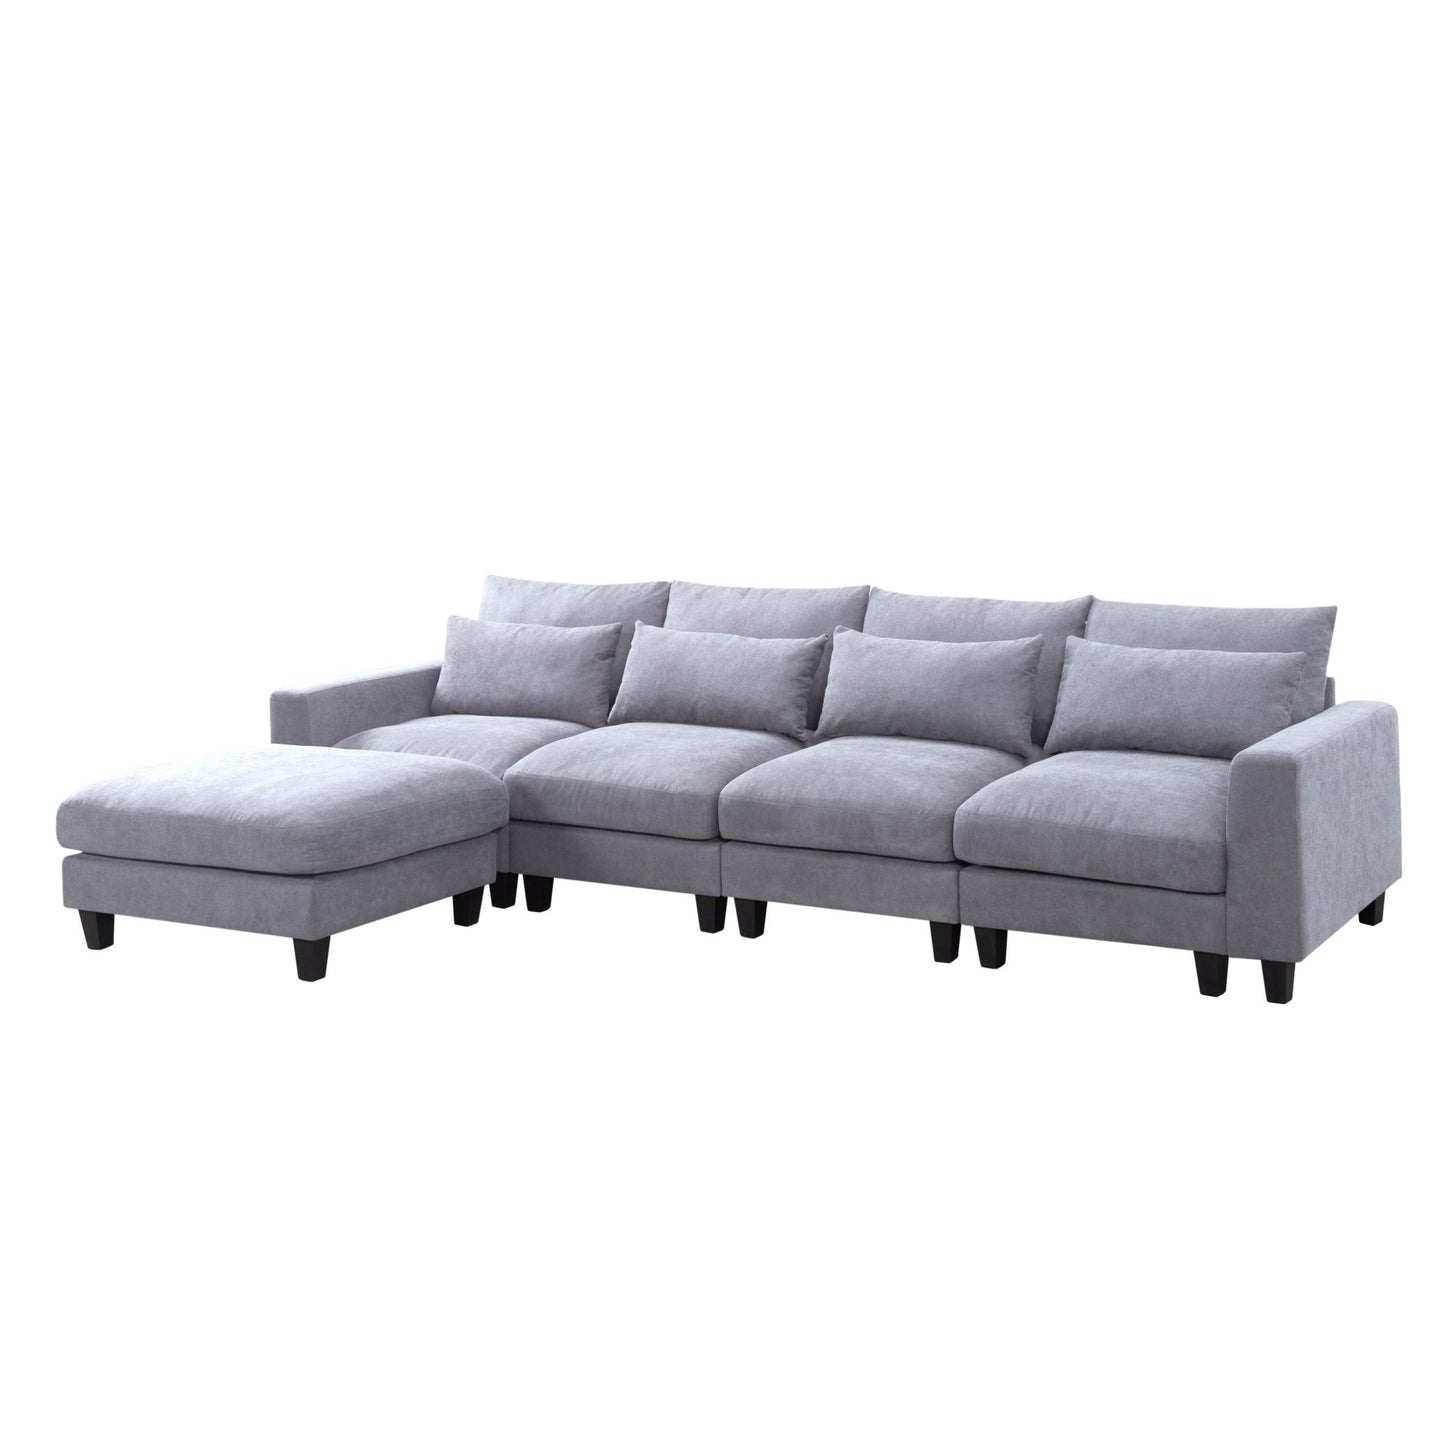 Contemporary Comfort L-Shaped Sectional Sofa with Ottoman